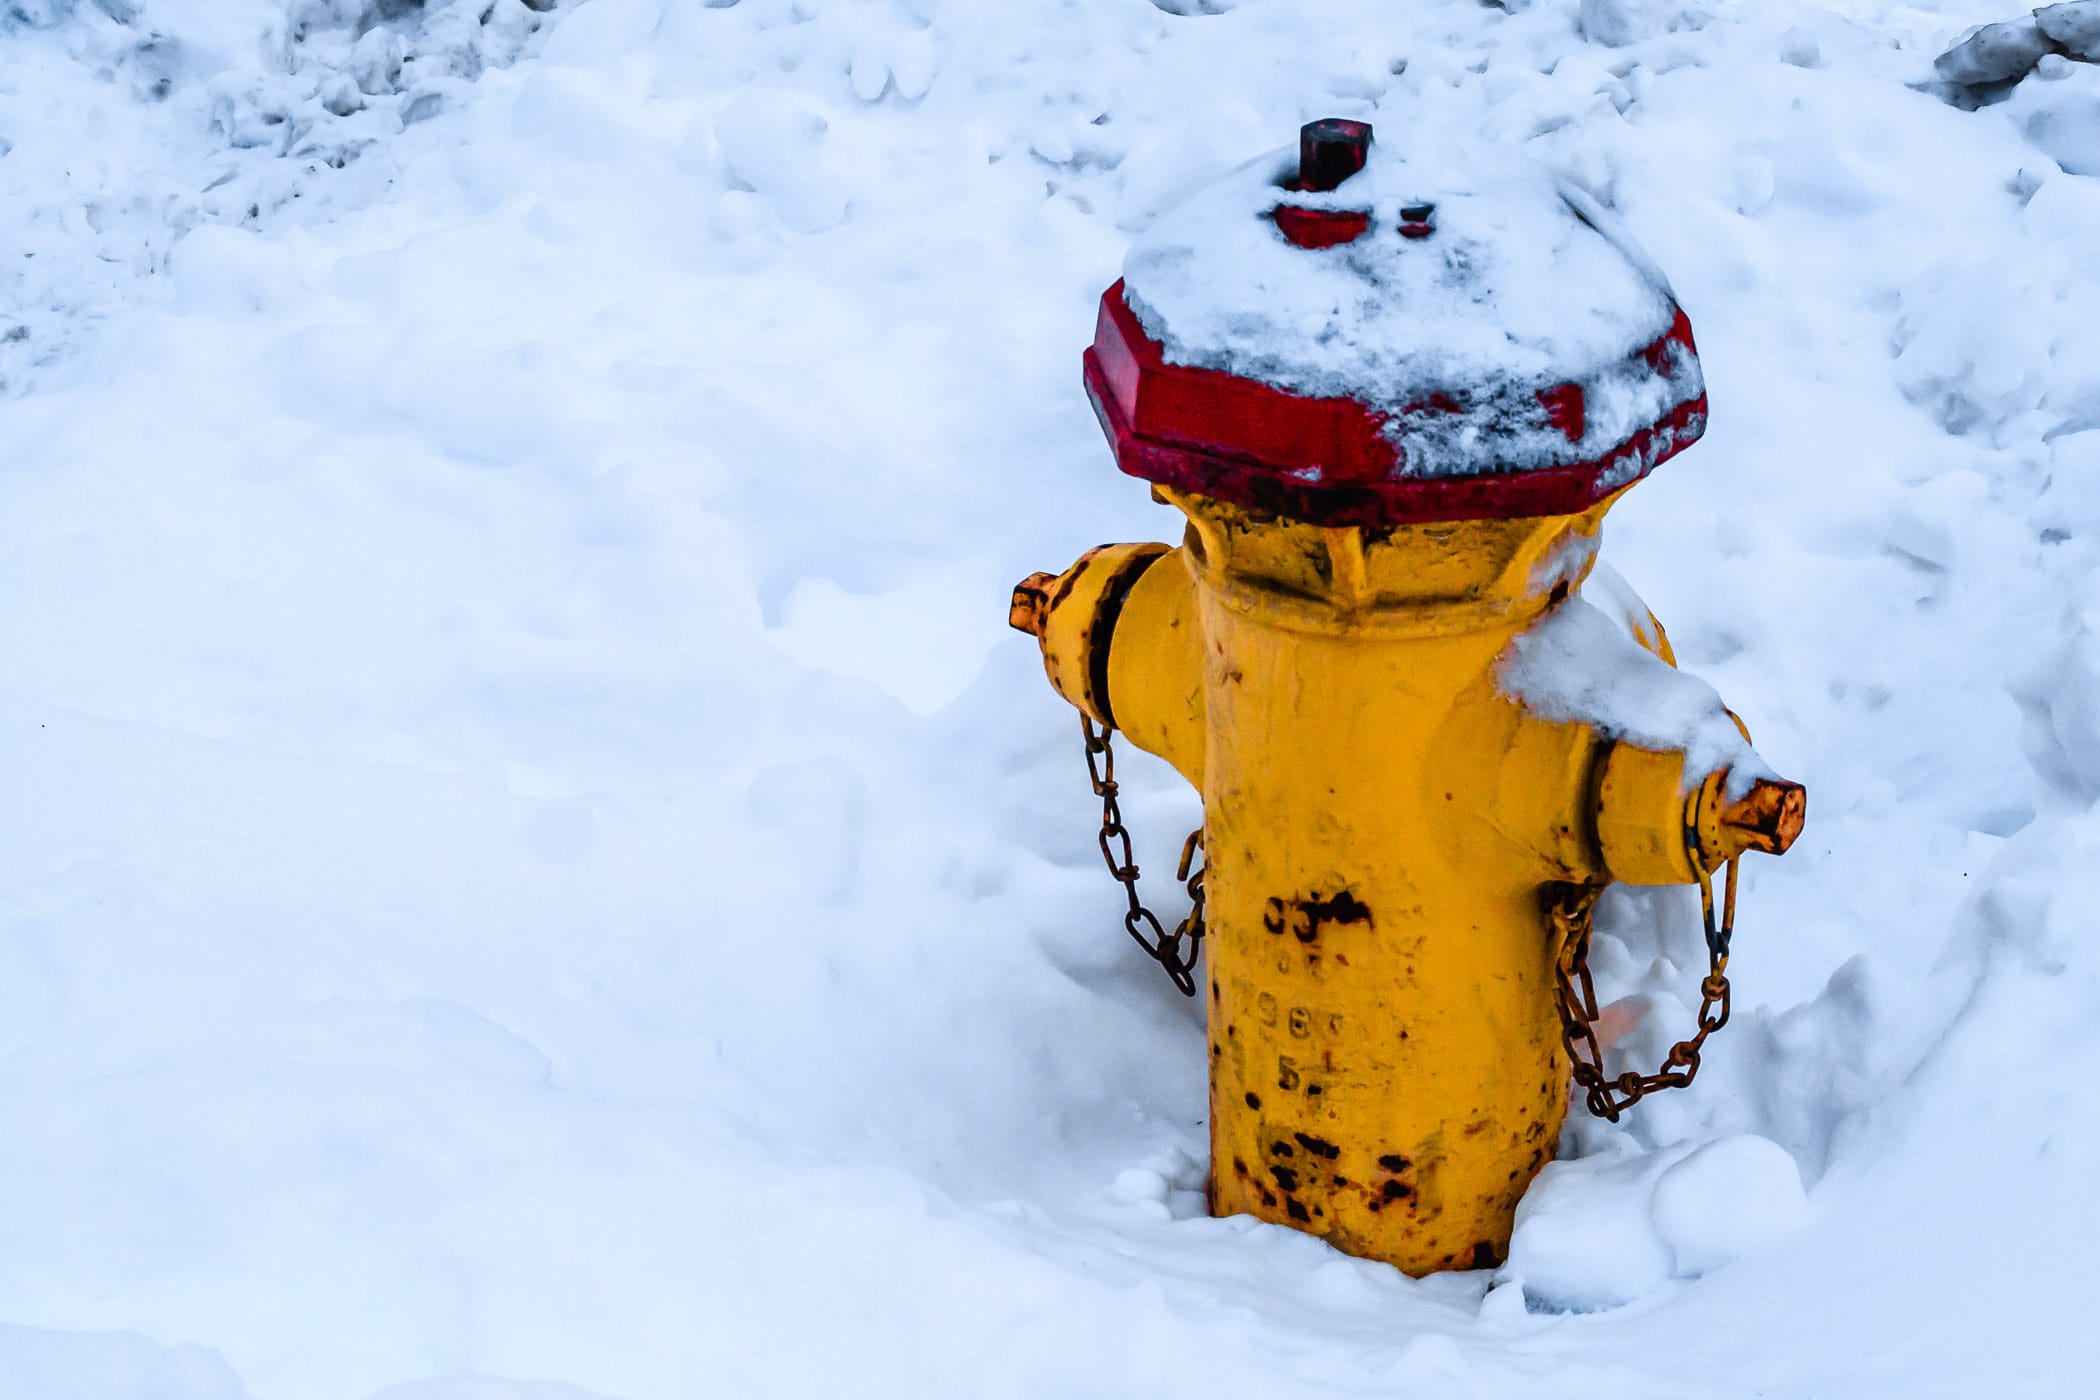 A snow-covered fire hydrant in Downtown Salt Lake City, Utah.